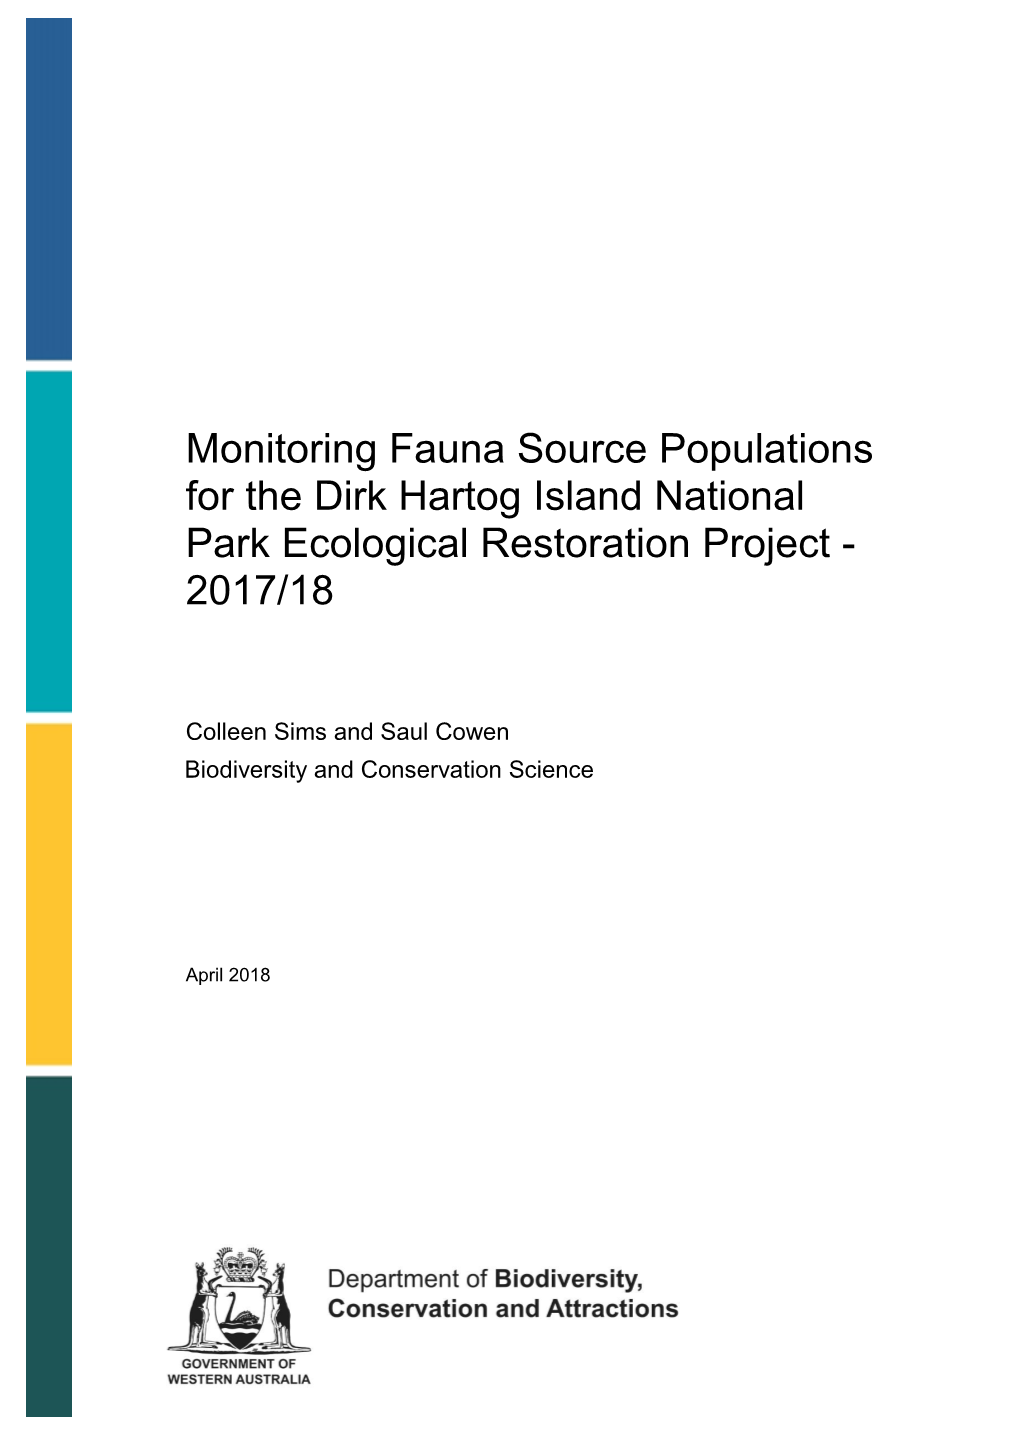 Monitoring Fauna Source Populations for the Dirk Hartog Island National Park Ecological Restoration Project - 2017/18